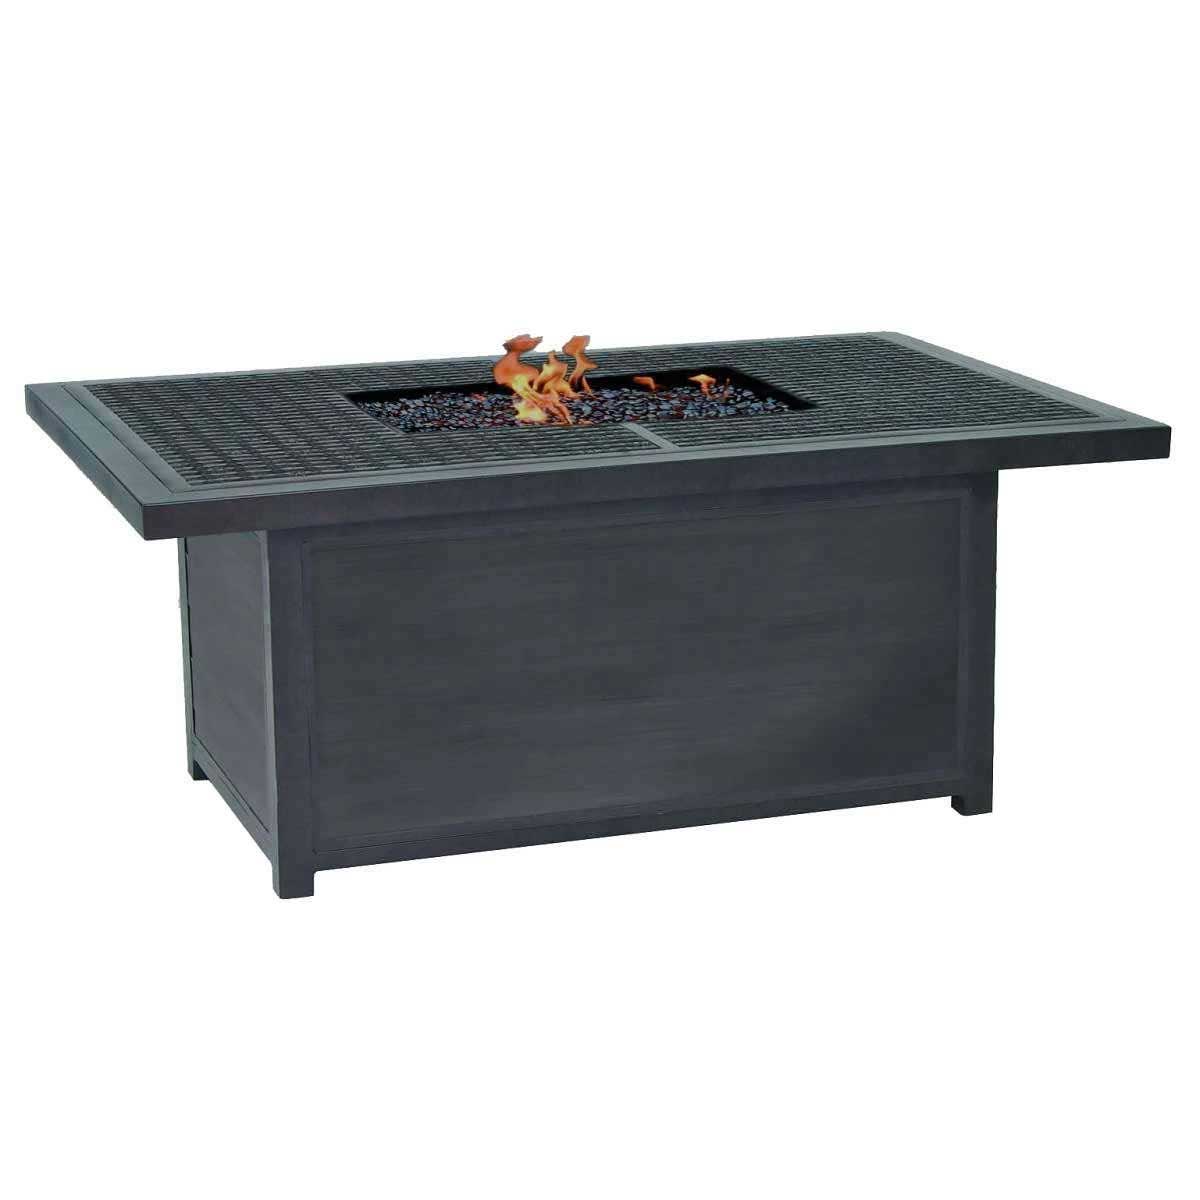 Castelle Altra 36" x 52" Rectangle Coffee Table Fire Pit with Live Edge Mahogany Top and Weathered Wood Finish Fireplaces 12027368